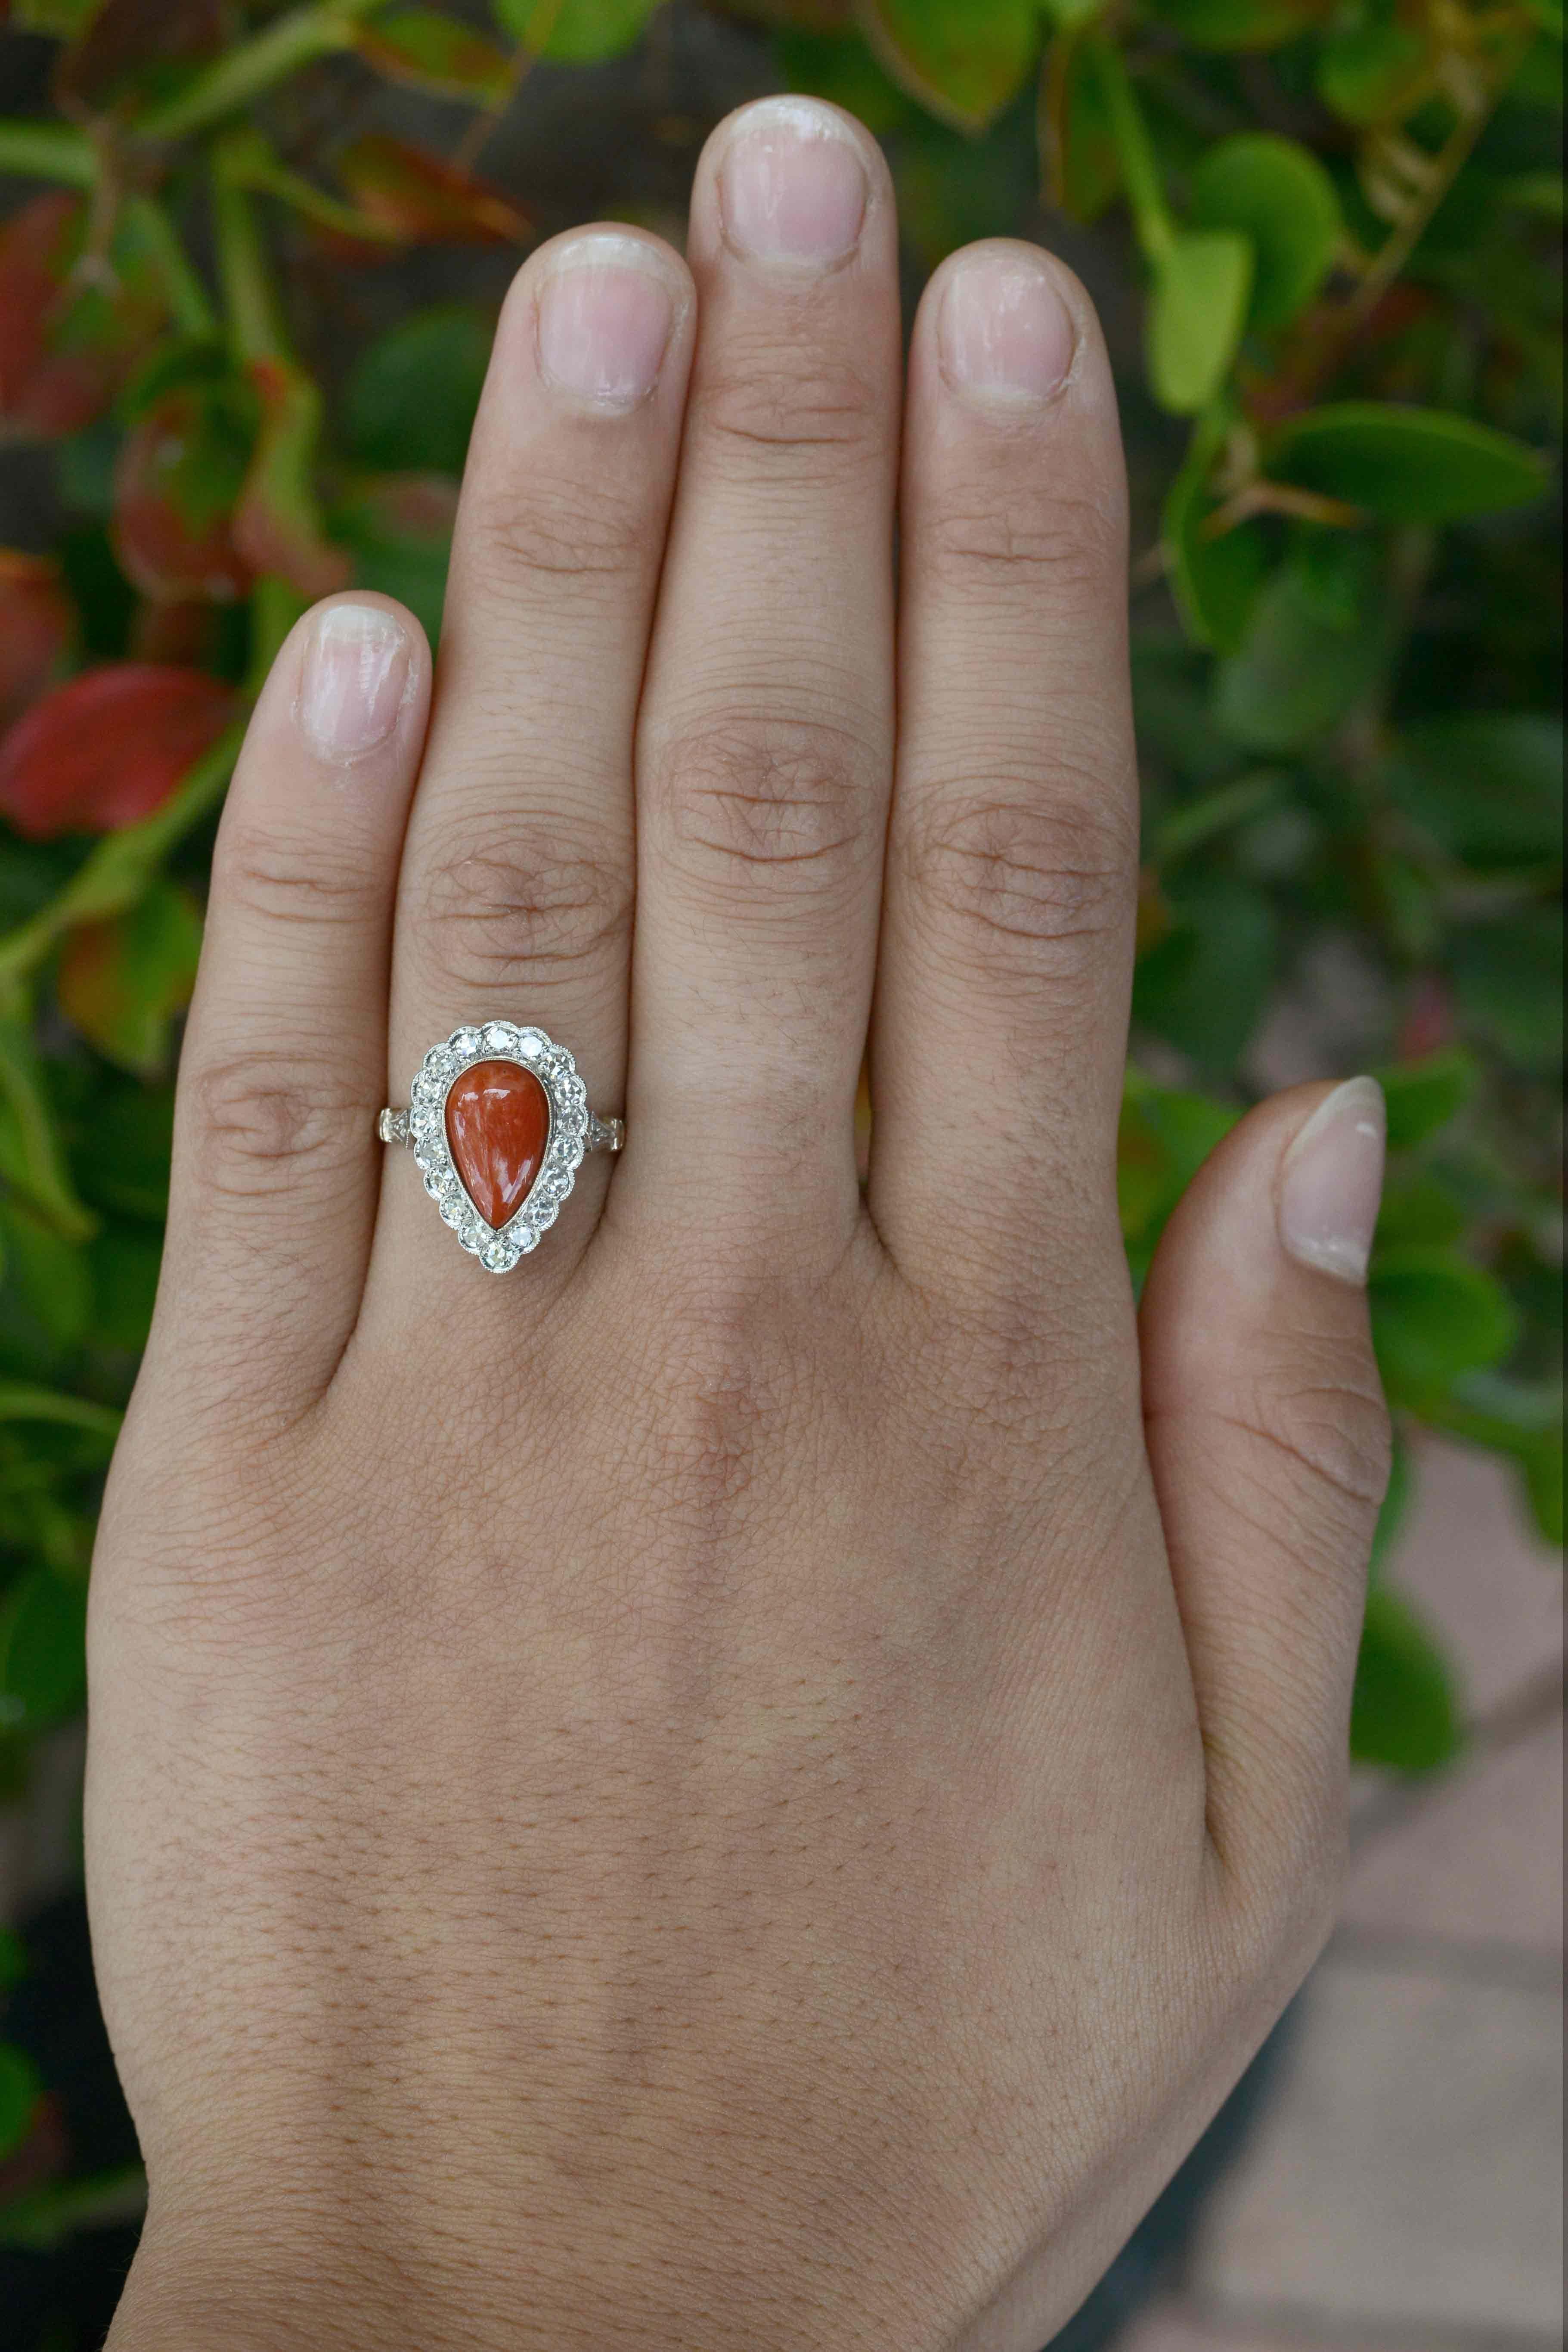 A dramatic red, ox blood coral takes center stage in this authentic antique coral cocktail ring. The pear shaped teardrop, a natural gem from the sea is smartly surrounded by a glittering, 18 diamond halo with scalloped, milgrain details. A dashing